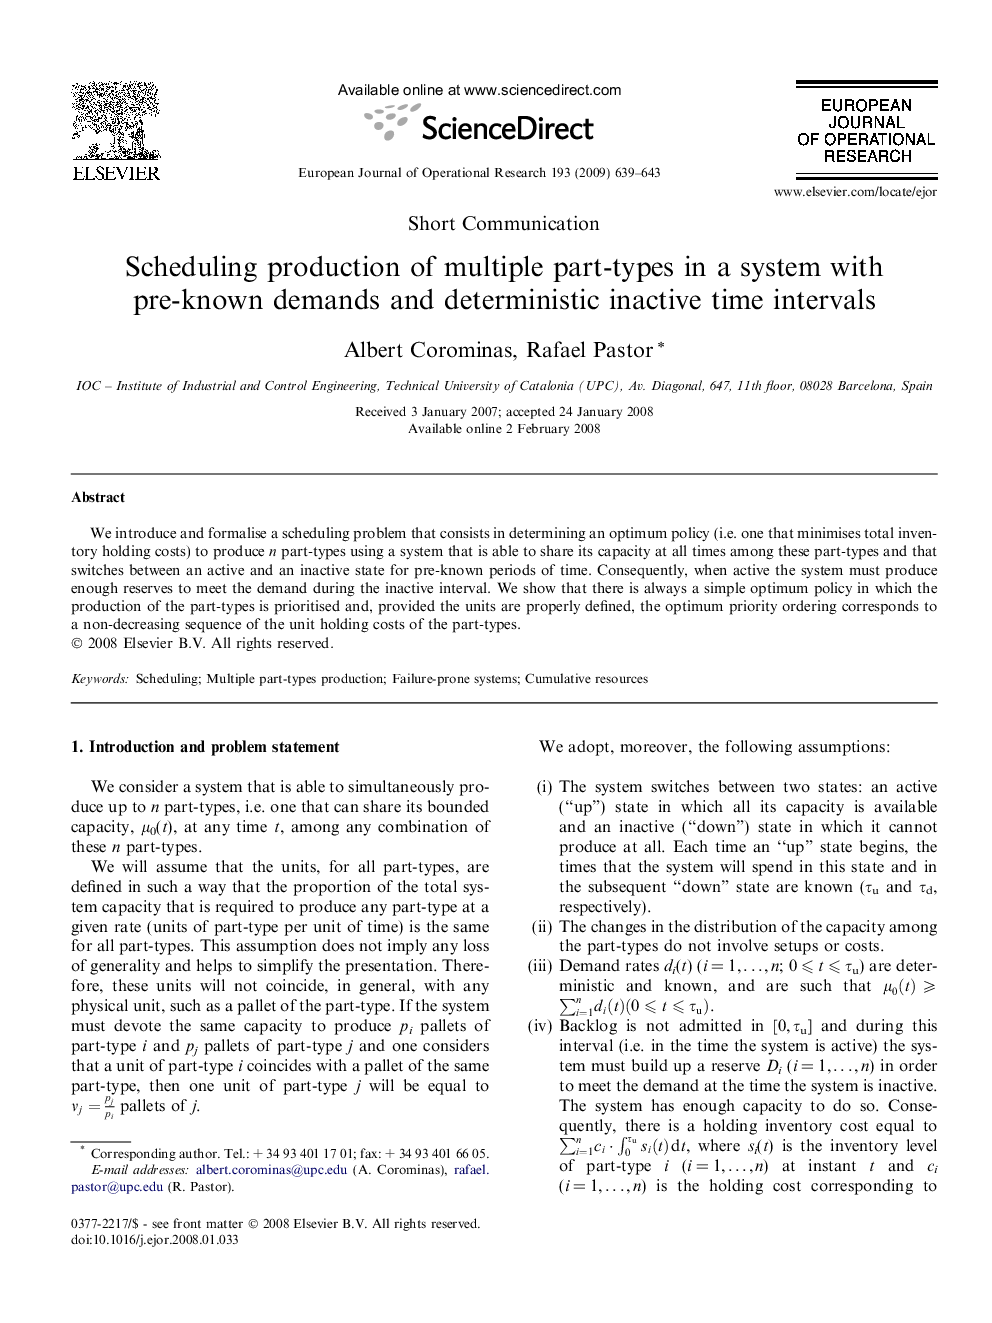 Scheduling production of multiple part-types in a system with pre-known demands and deterministic inactive time intervals